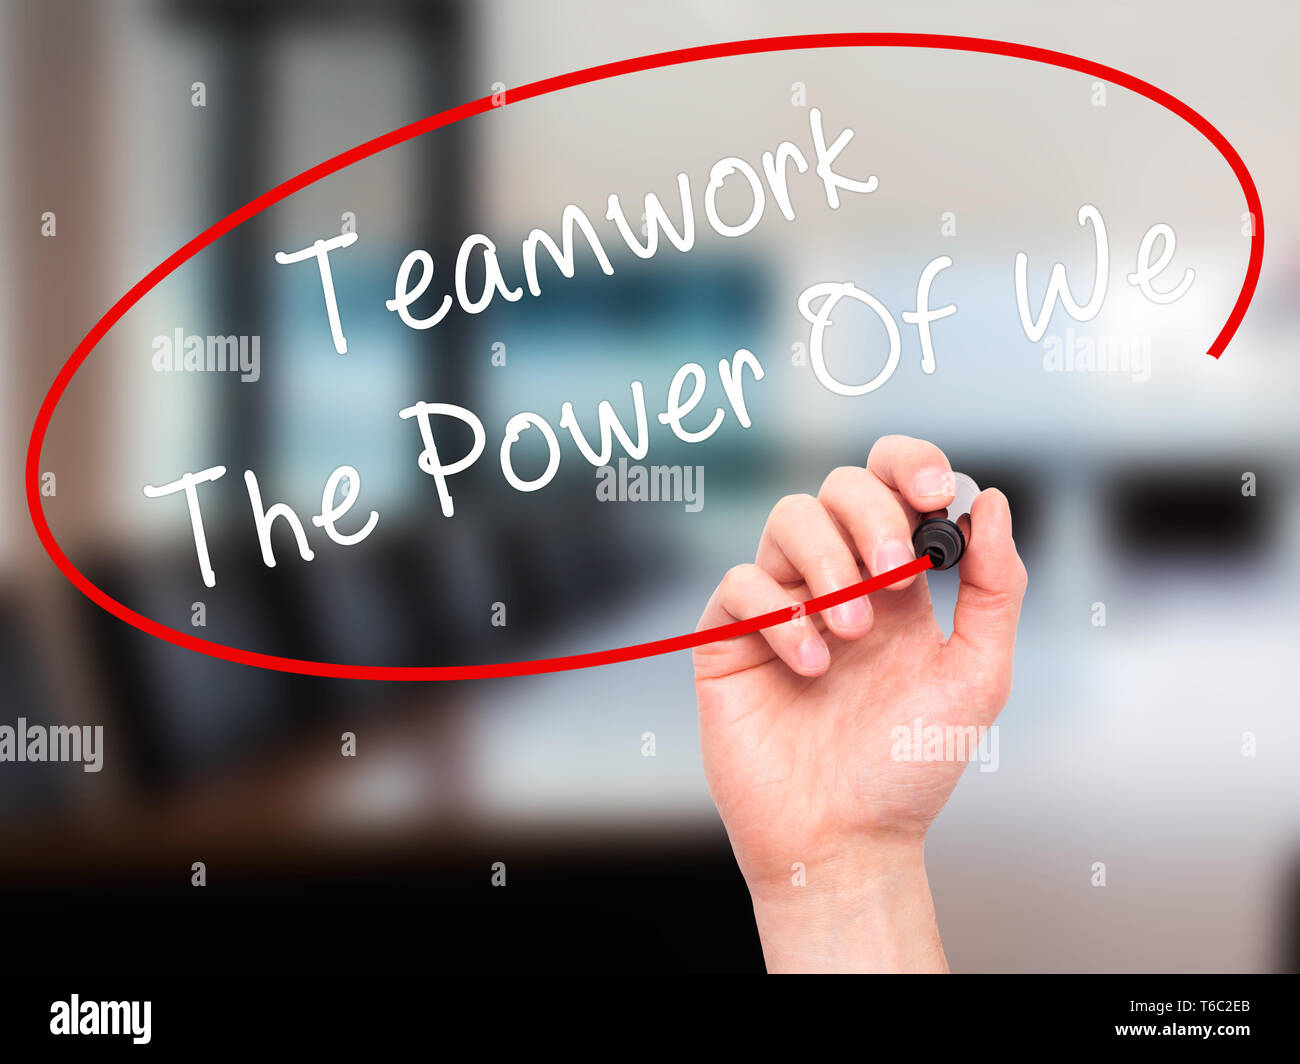 Man Hand writing Teamwork - The Power Of We with black marker on visual screen Stock Photo